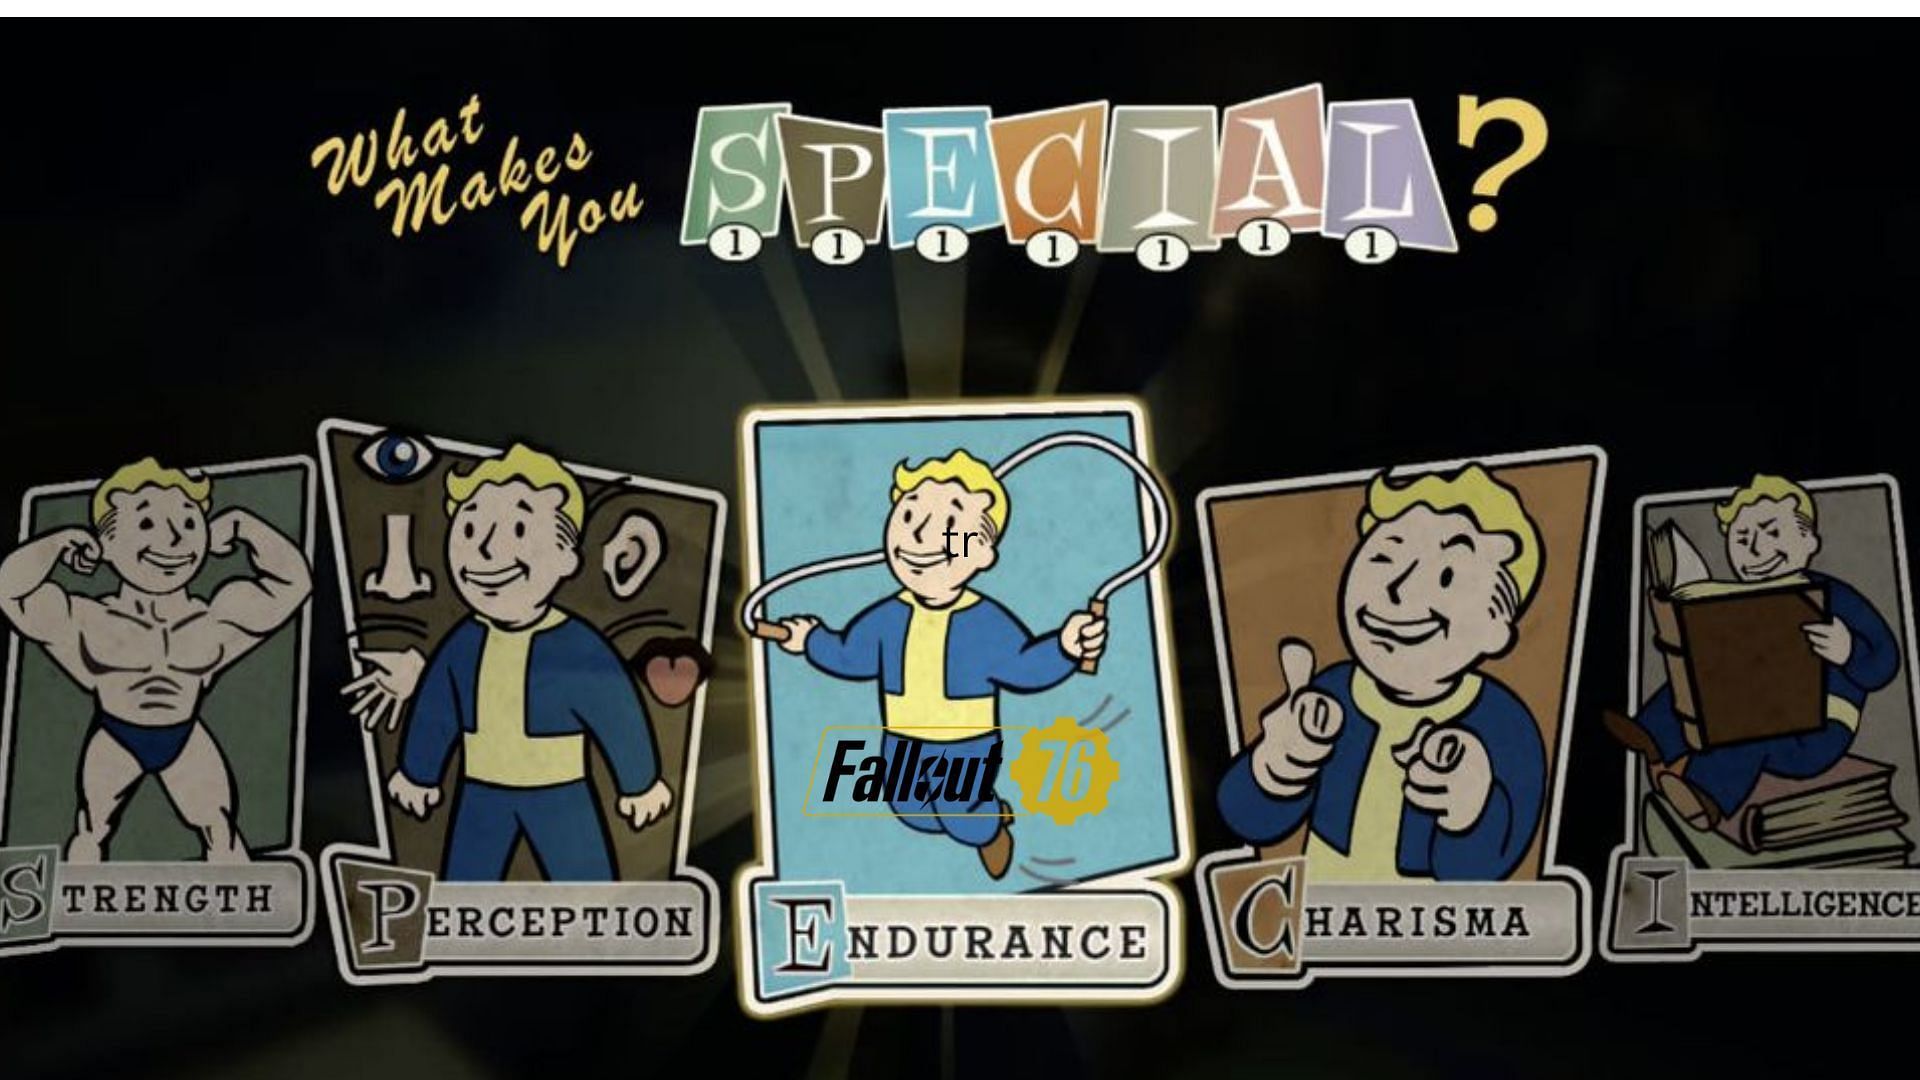 SPECIAL or attributes symbolize the seven in-game stats of players (Image via Bethesda Game Studios)